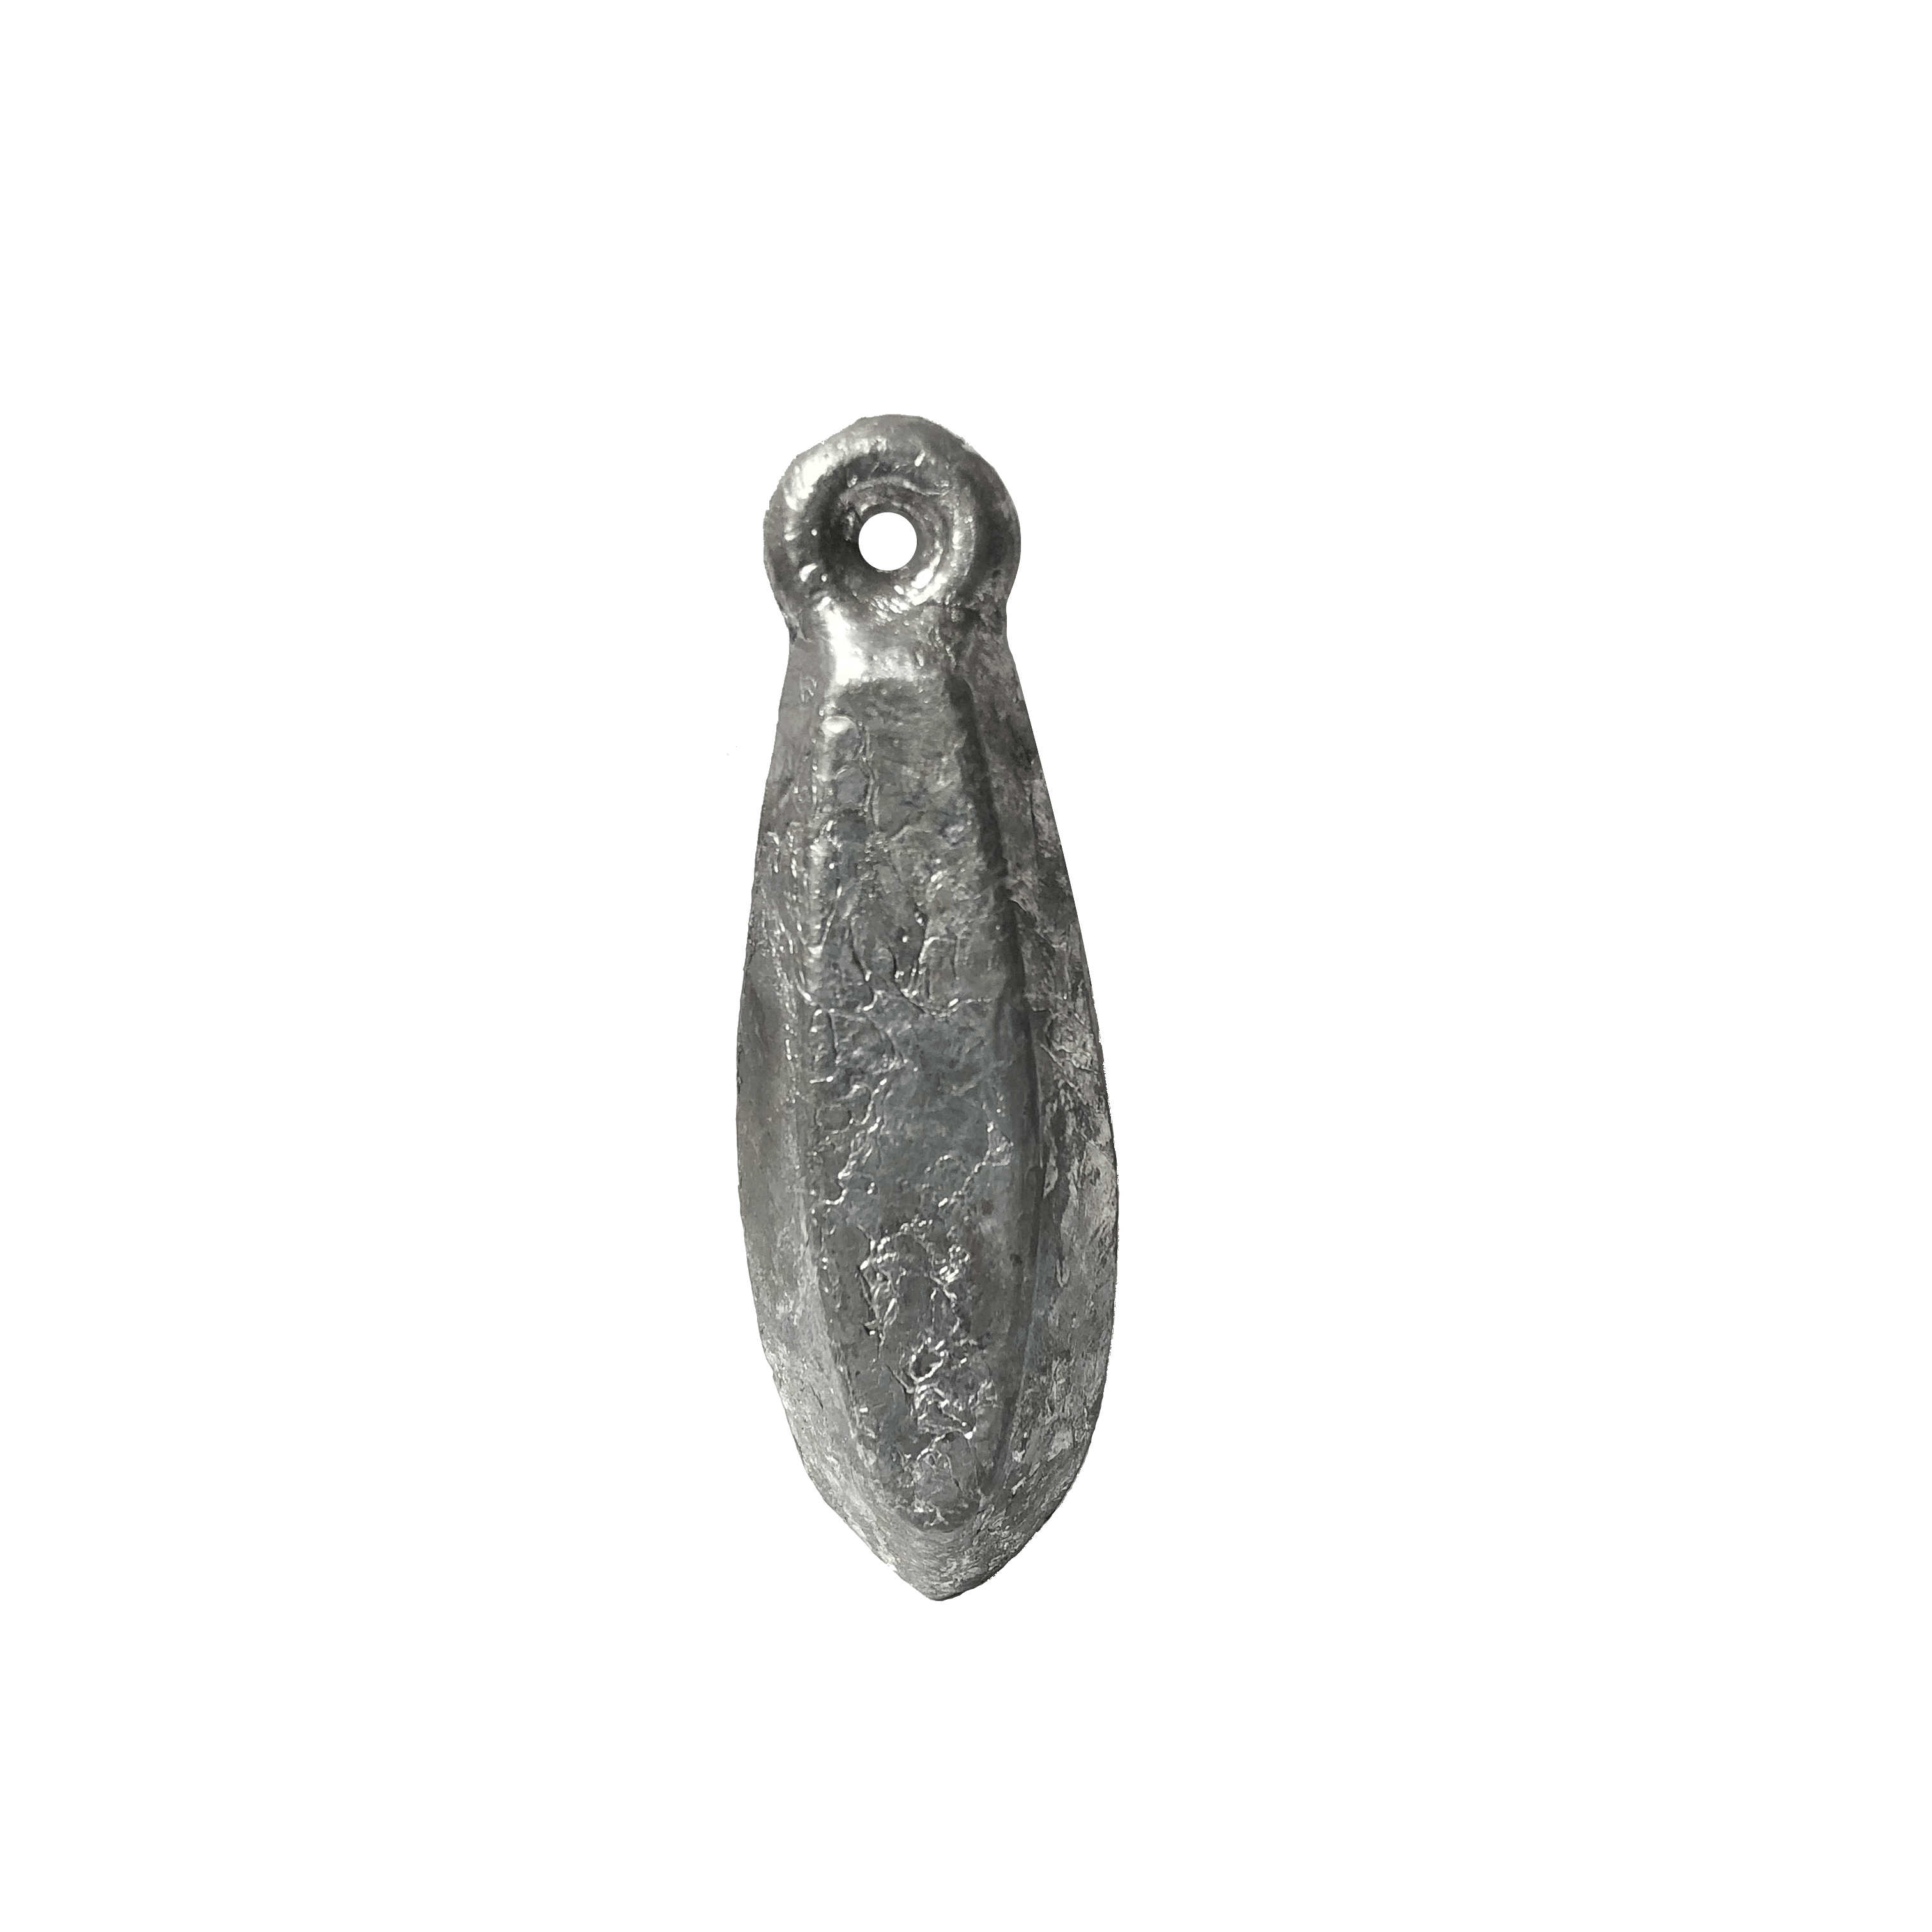 Fishing Weights and Sinkers used in Wisconsin